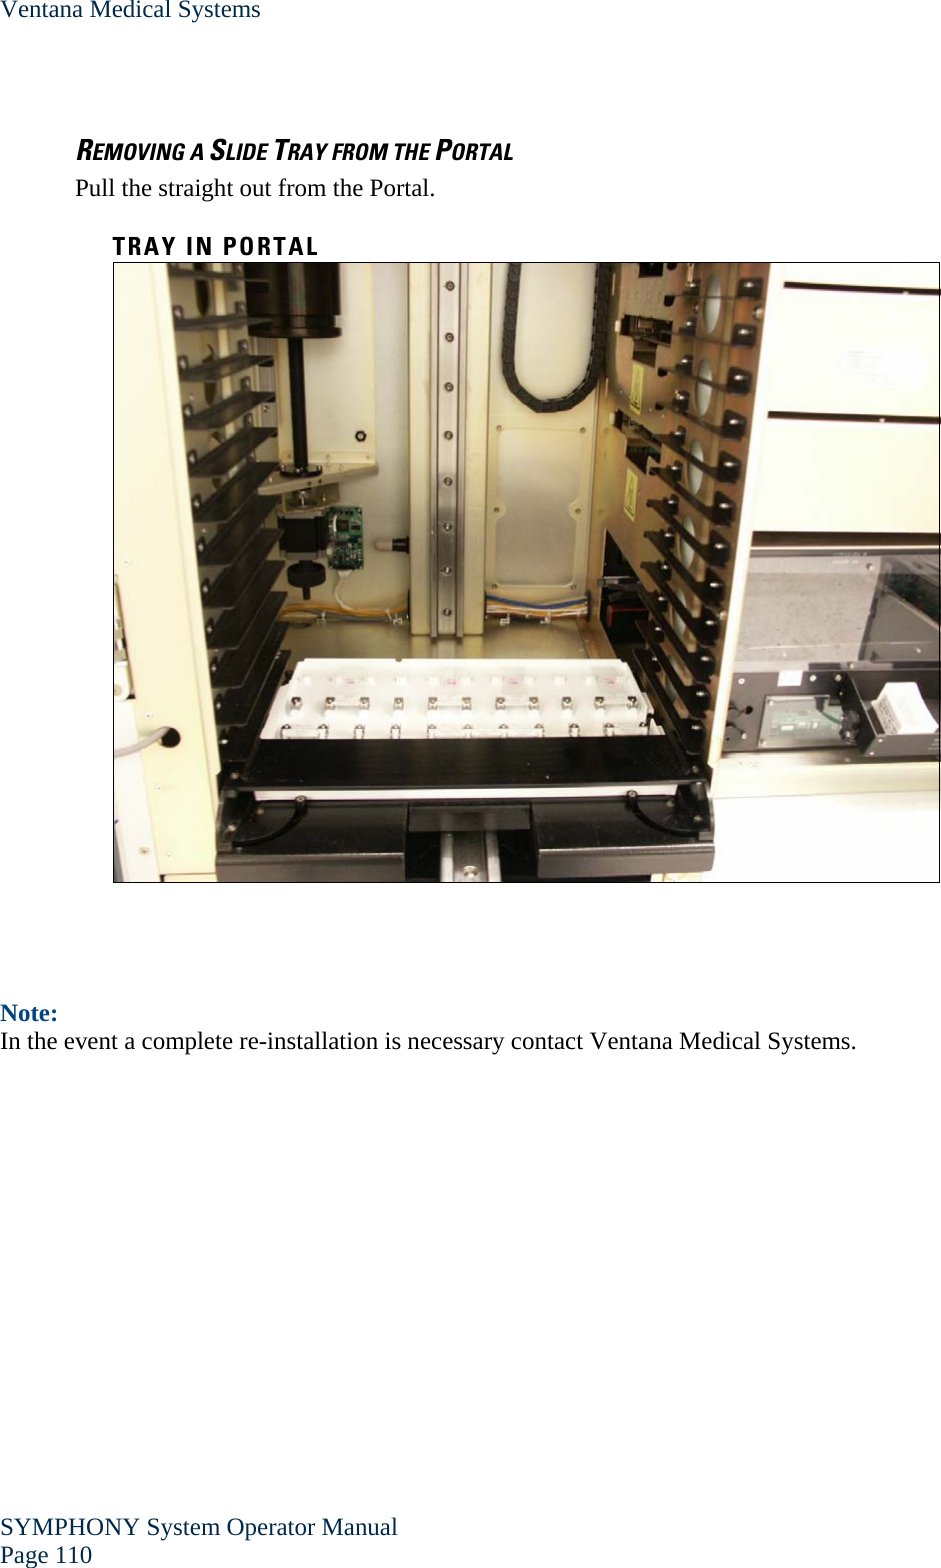 Ventana Medical Systems SYMPHONY System Operator Manual Page 110    REMOVING A SLIDE TRAY FROM THE PORTAL Pull the straight out from the Portal.  TRAY IN PORTAL     Note: In the event a complete re-installation is necessary contact Ventana Medical Systems. 